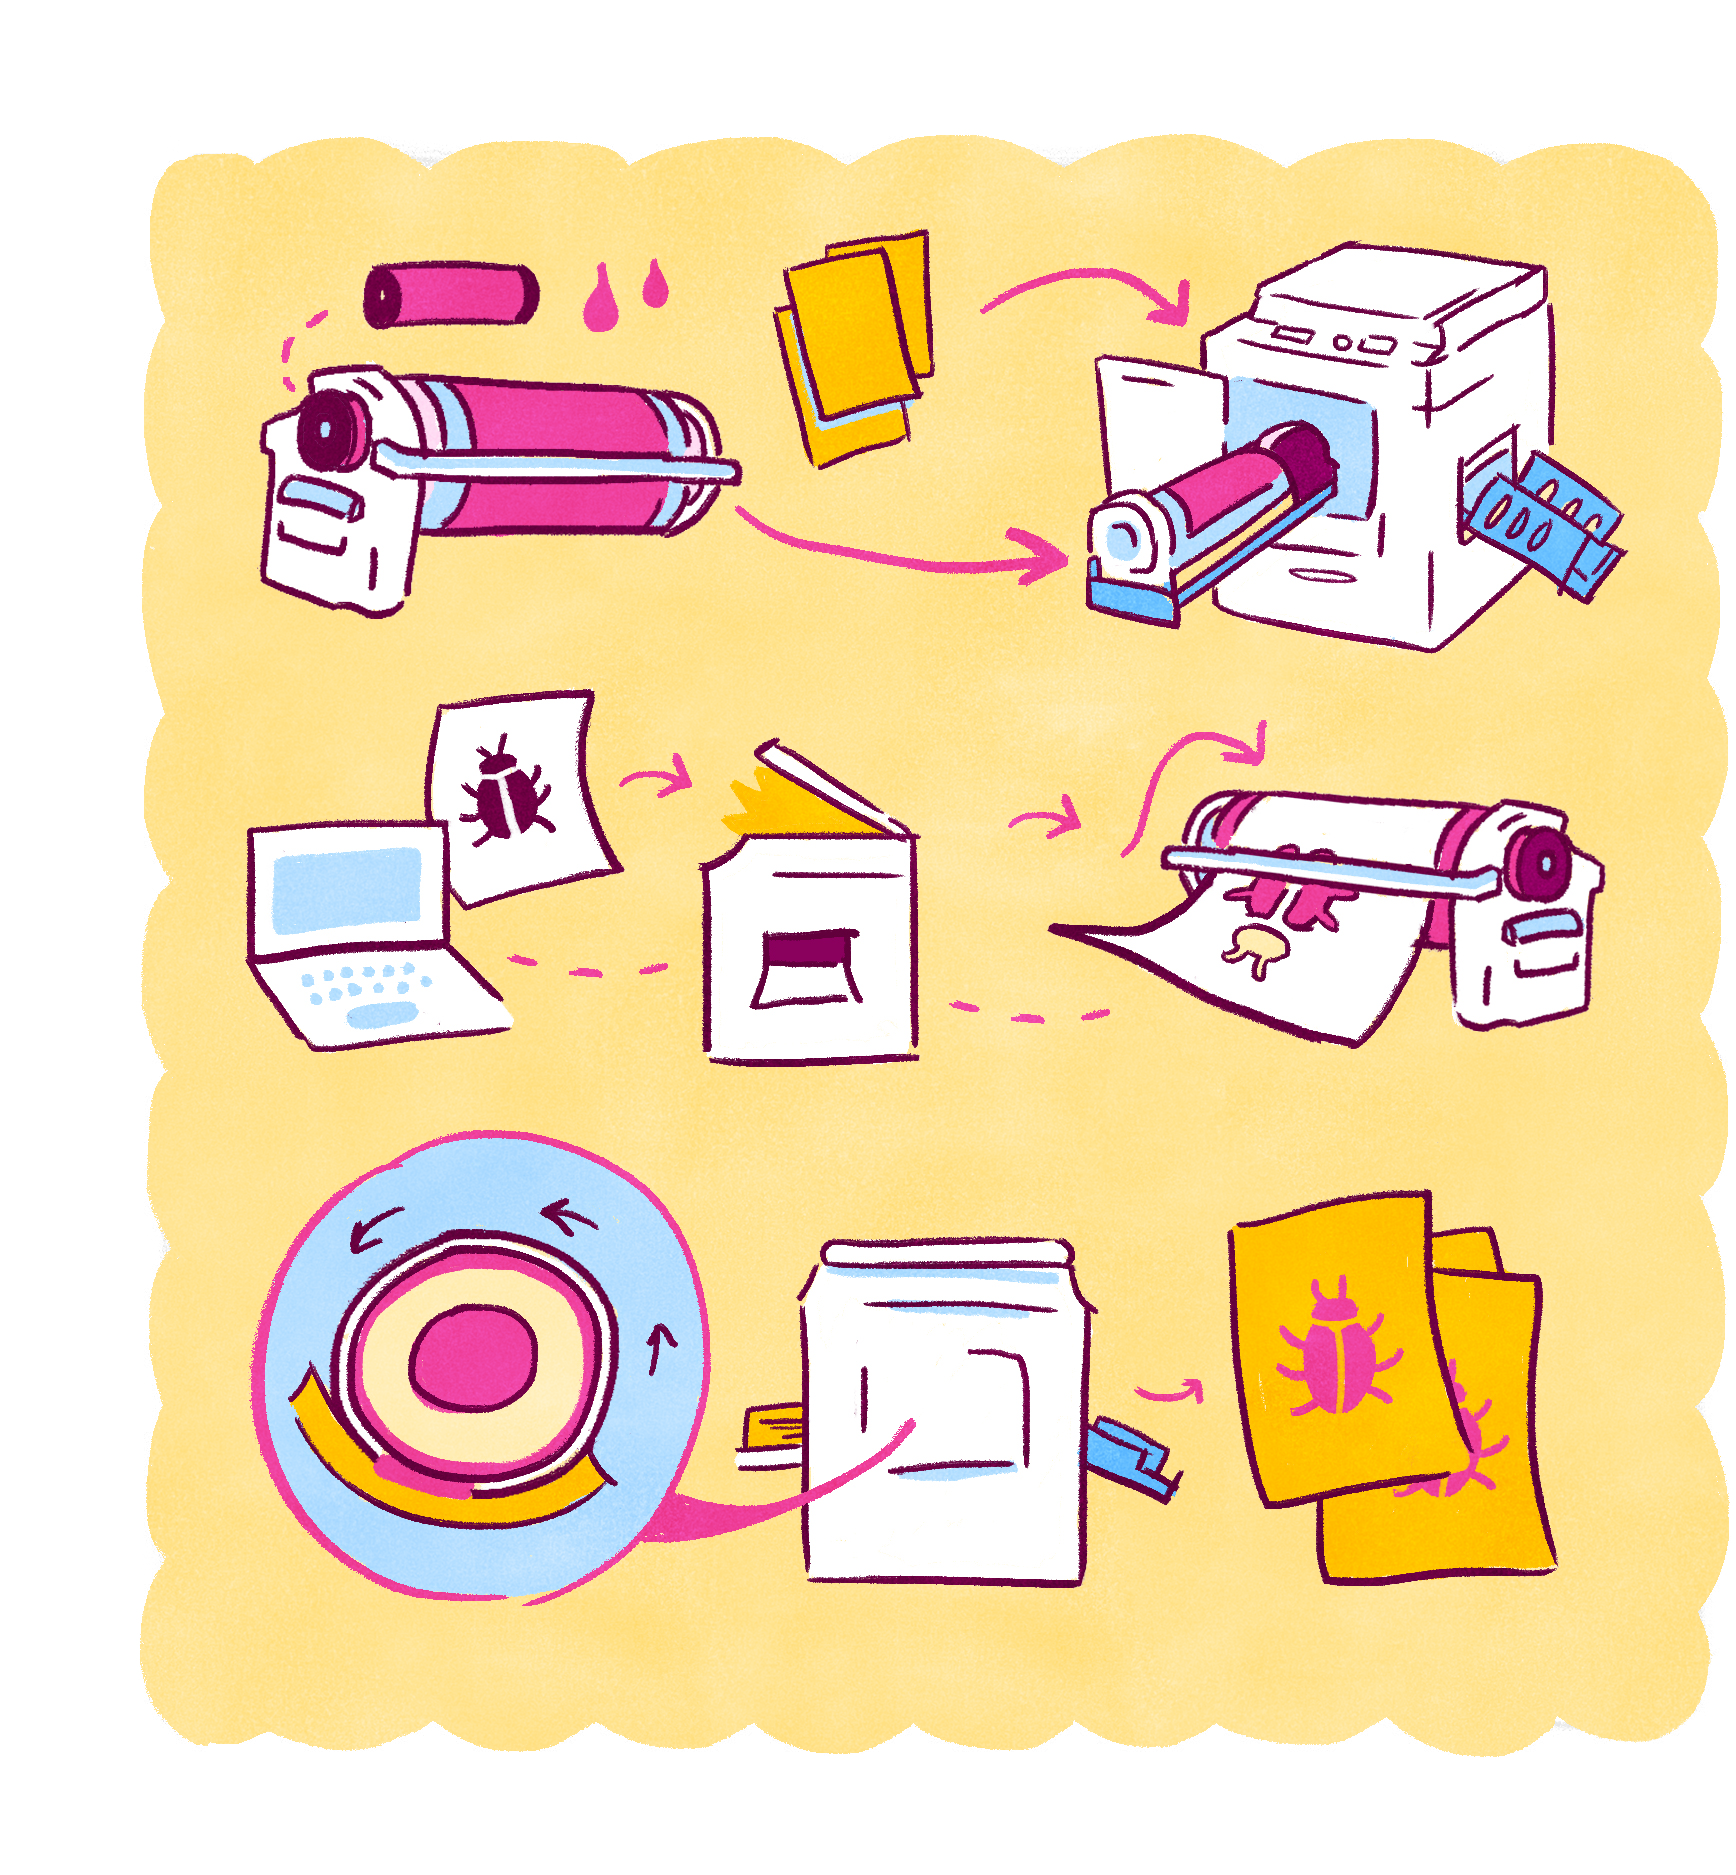 Illustartion showing the steps to Risograph printing. The background is yellow and the objects have a pink and blue color scheme.